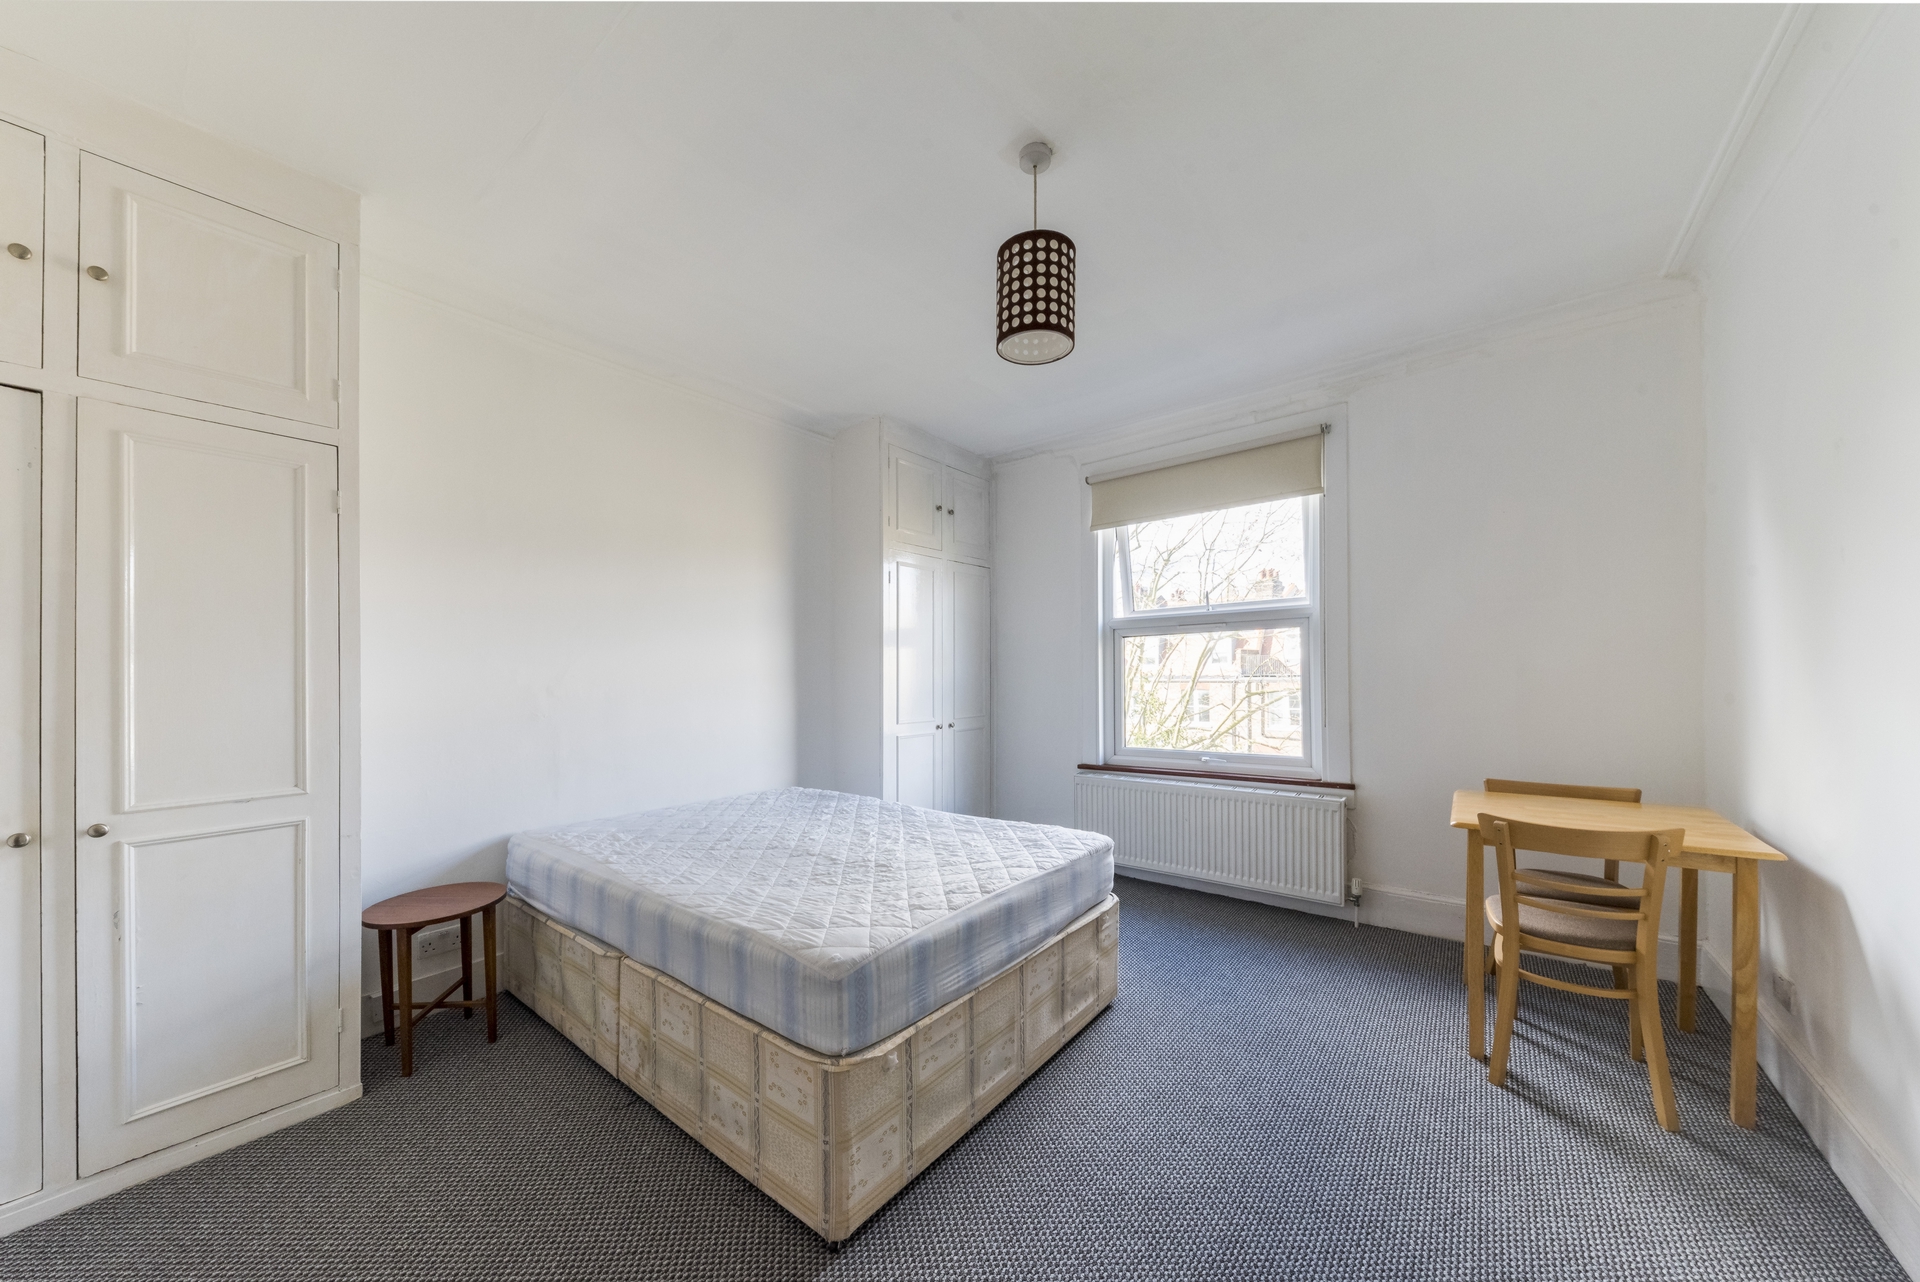 Bedsit to rent in Belsize Road, South Hampstead, London, NW6